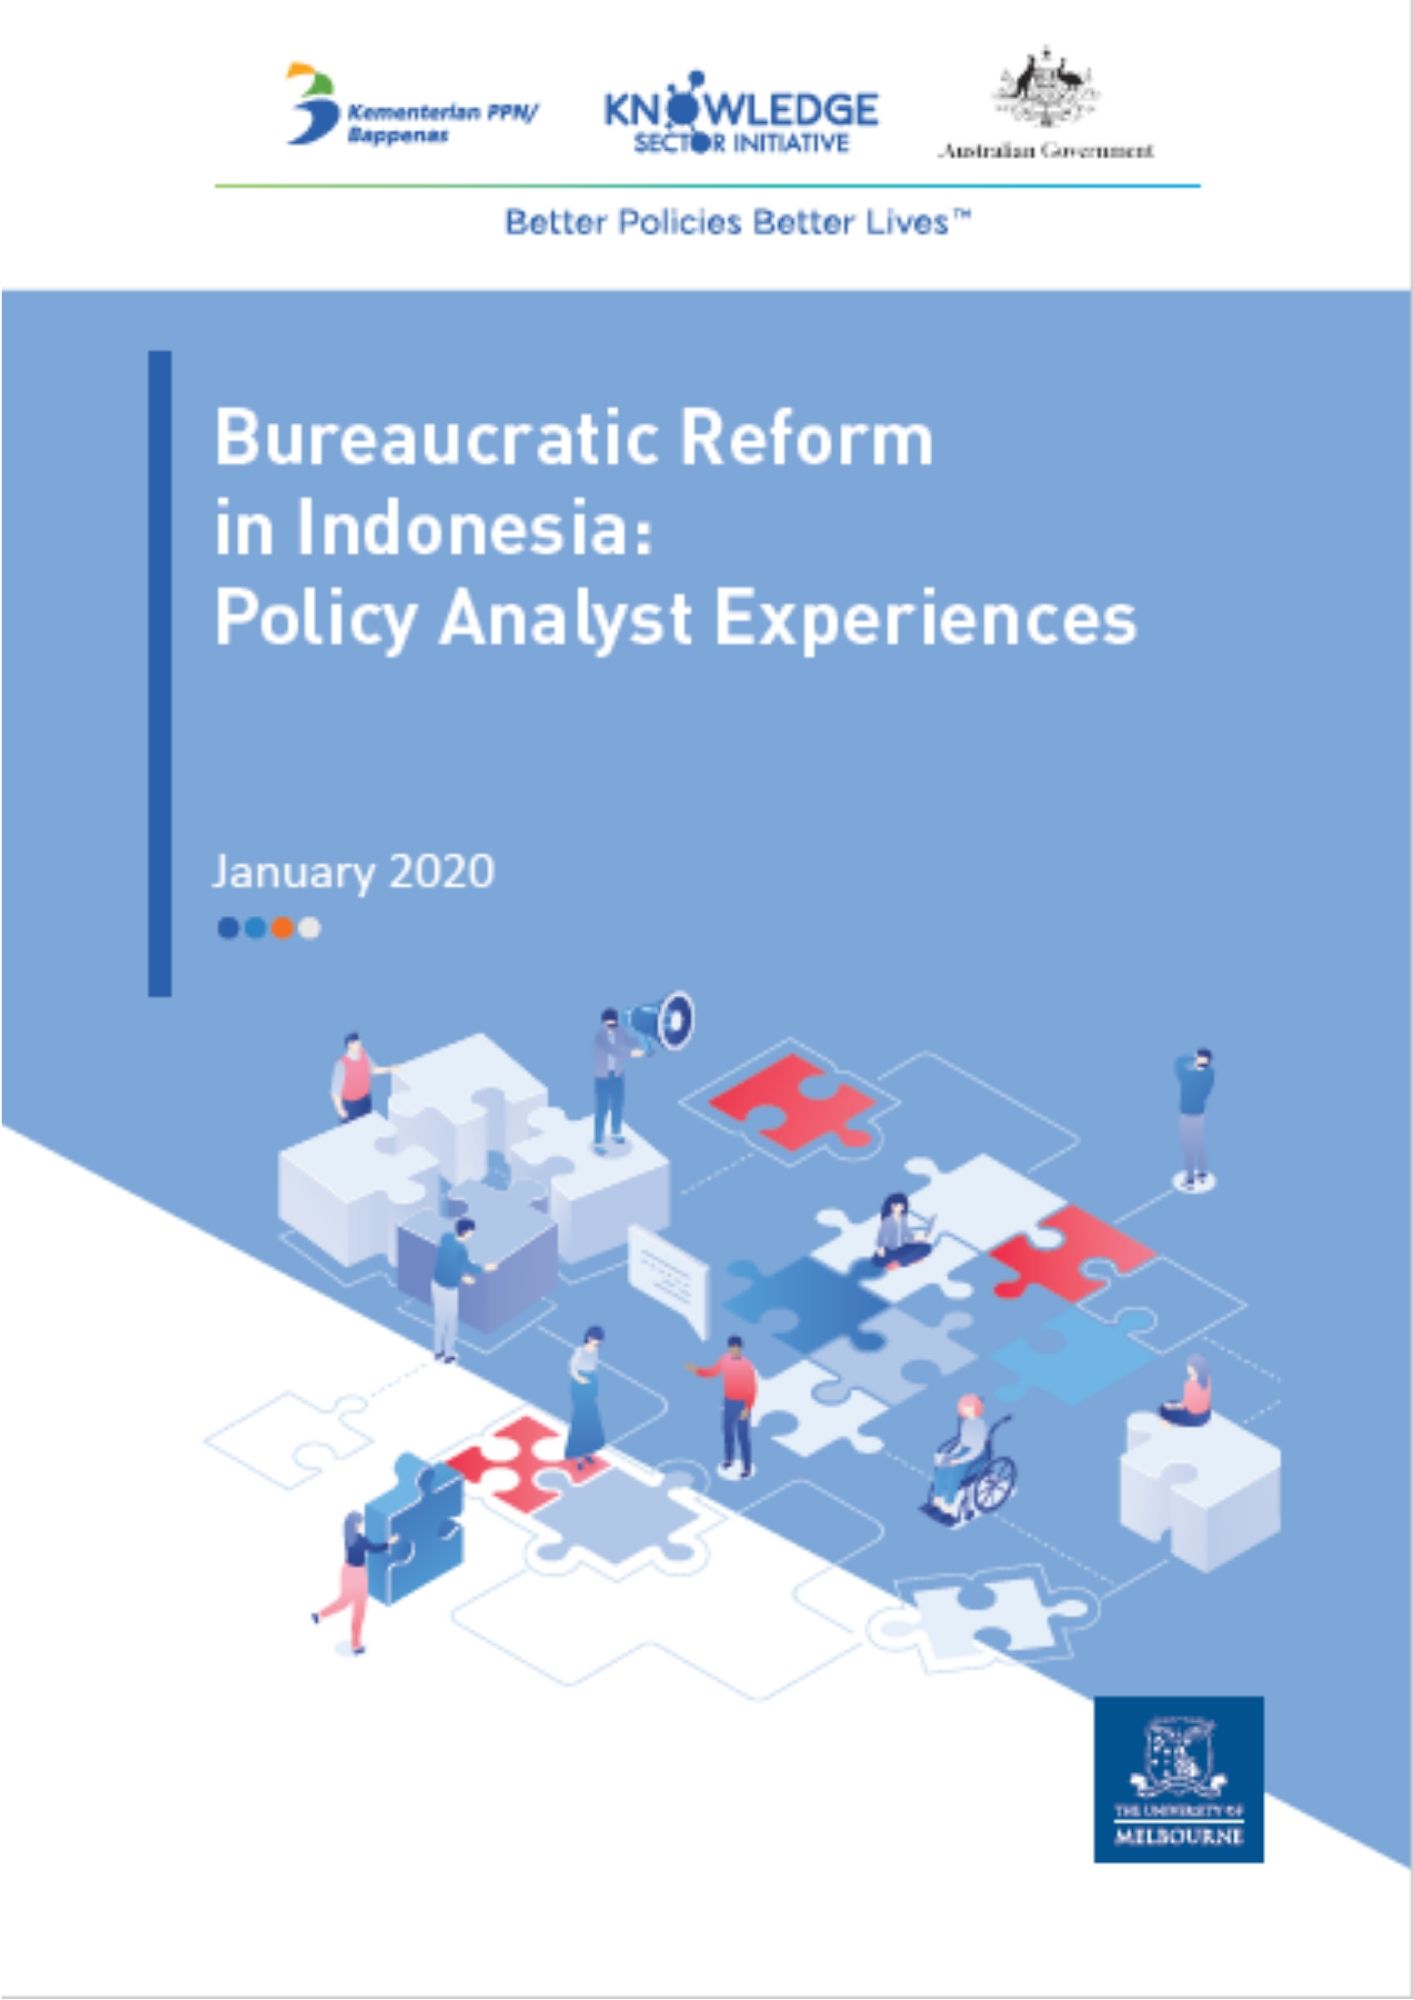 Bureaucratic Reform in Indonesia: Policy Analyst Experiences